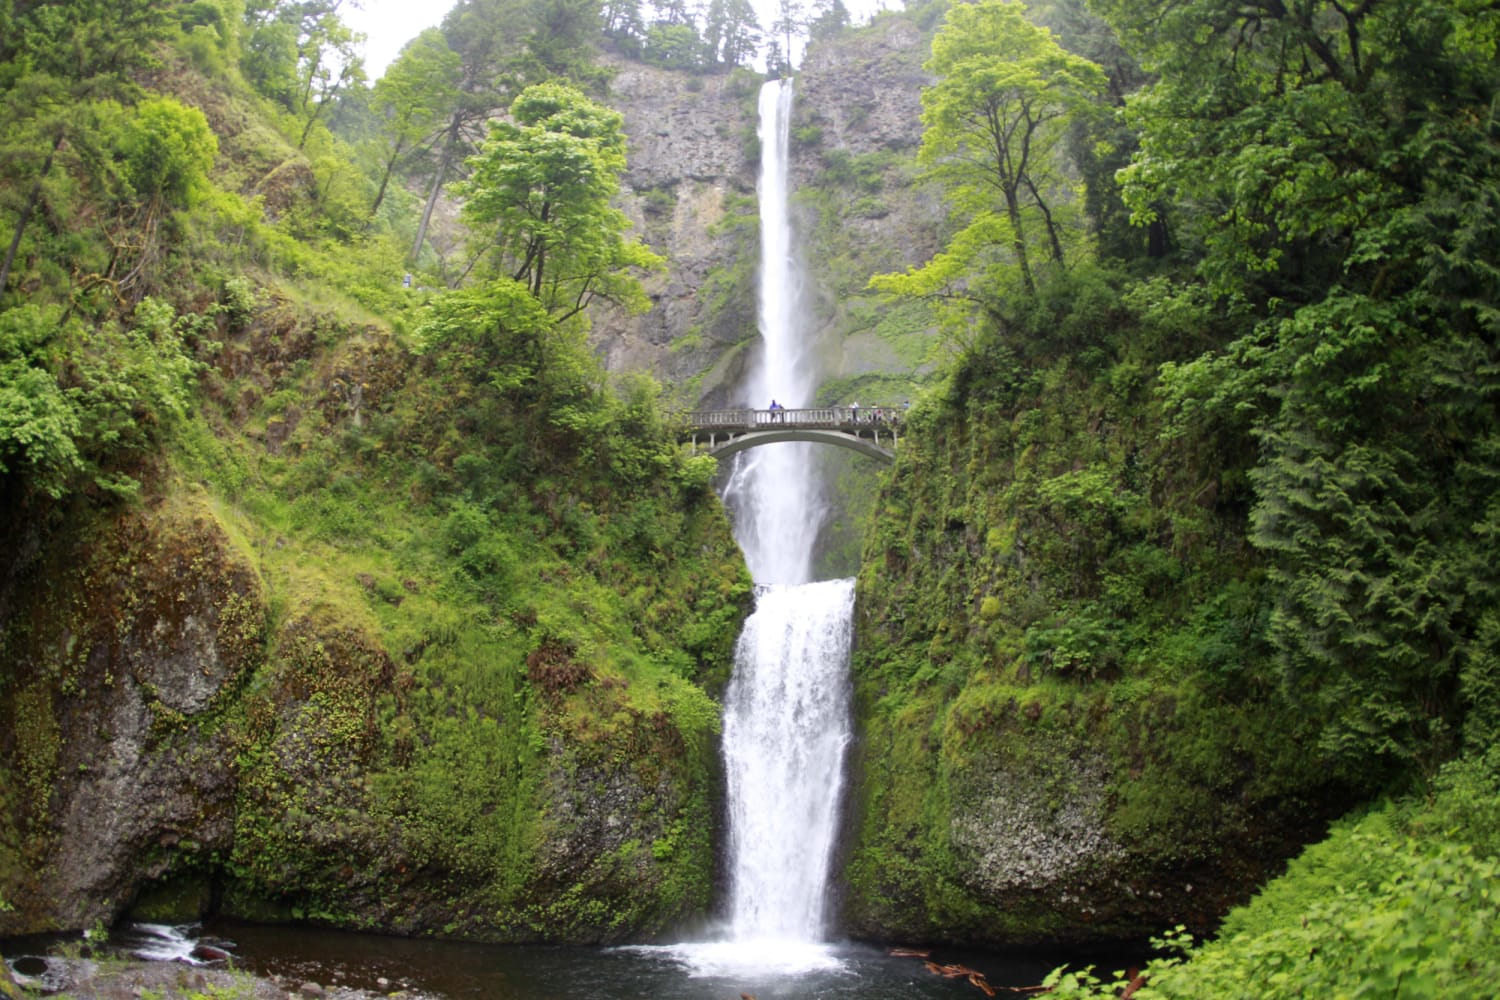 Mother and toddler survive over 100 foot fall while hiking in Oregon